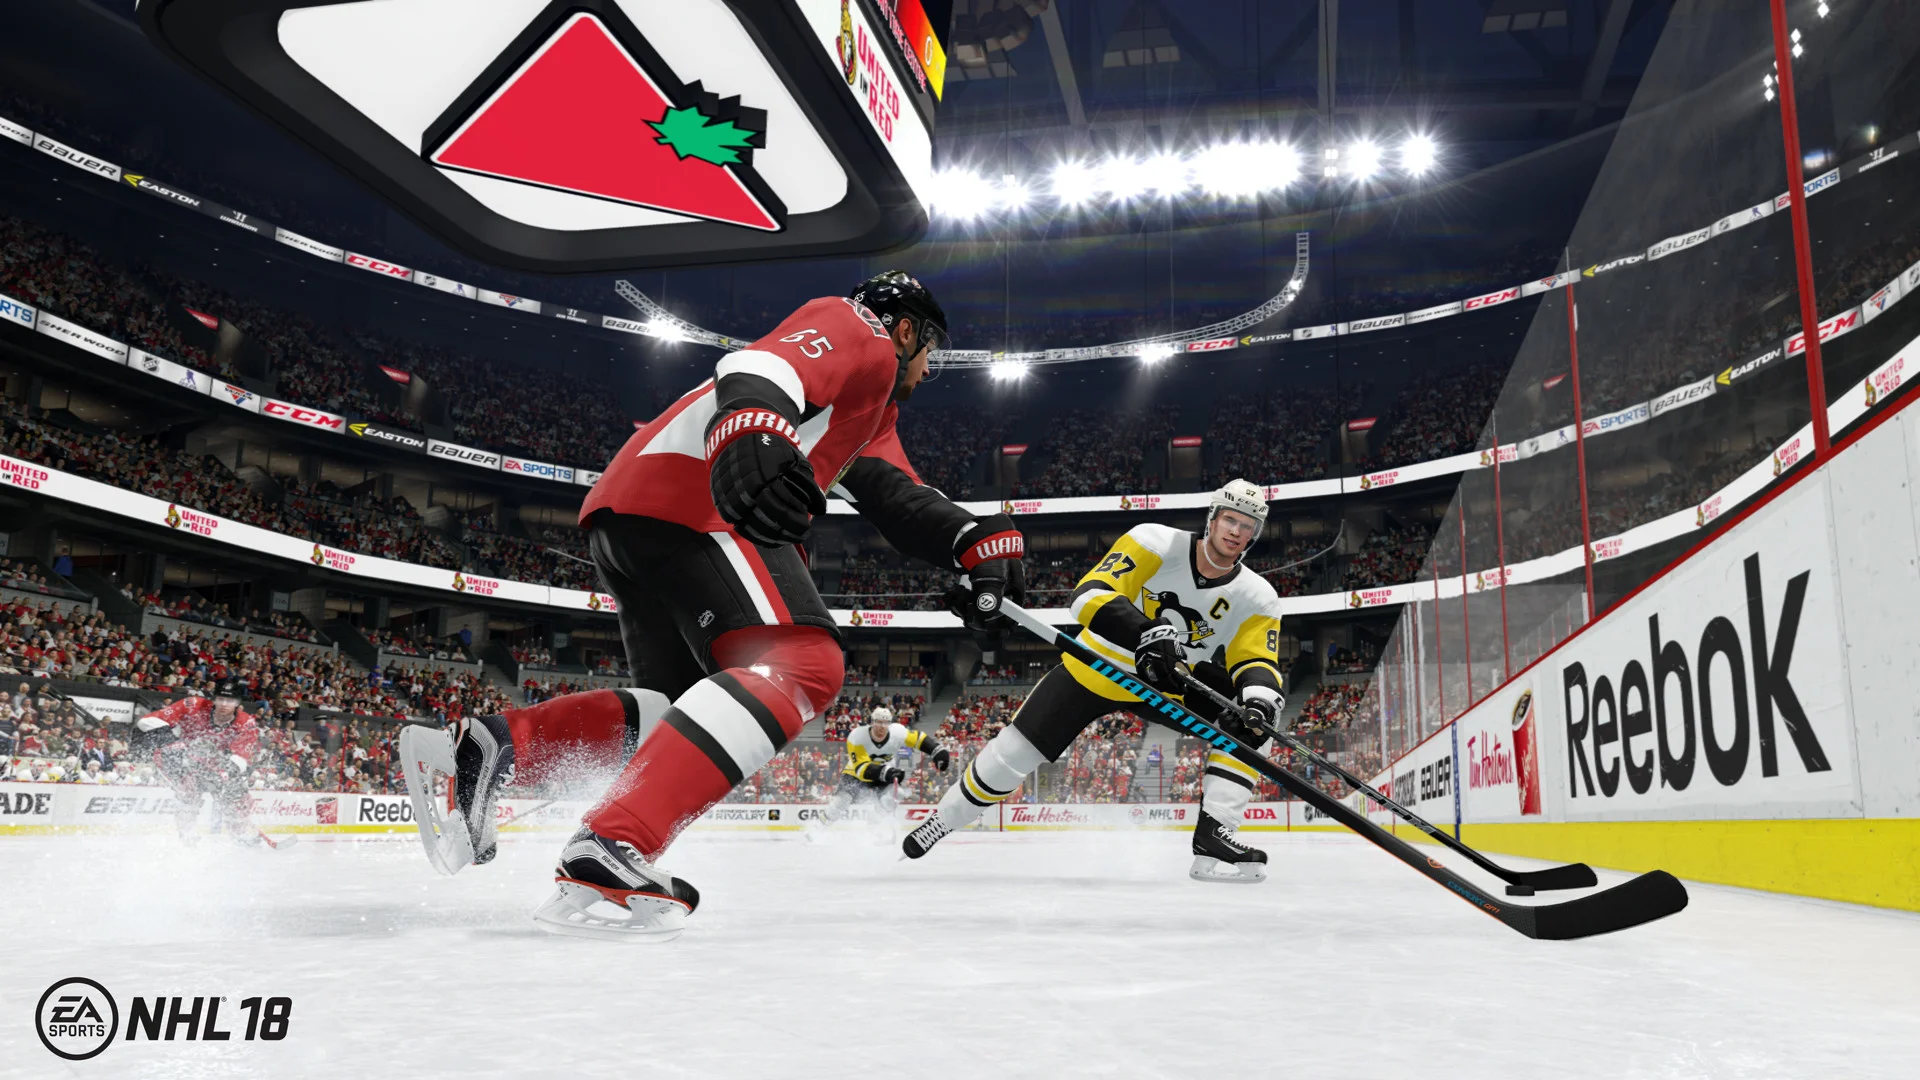 NHL 18 – Eric Karlsson using Defensive Skill Stick to hold off Sidney Crosby